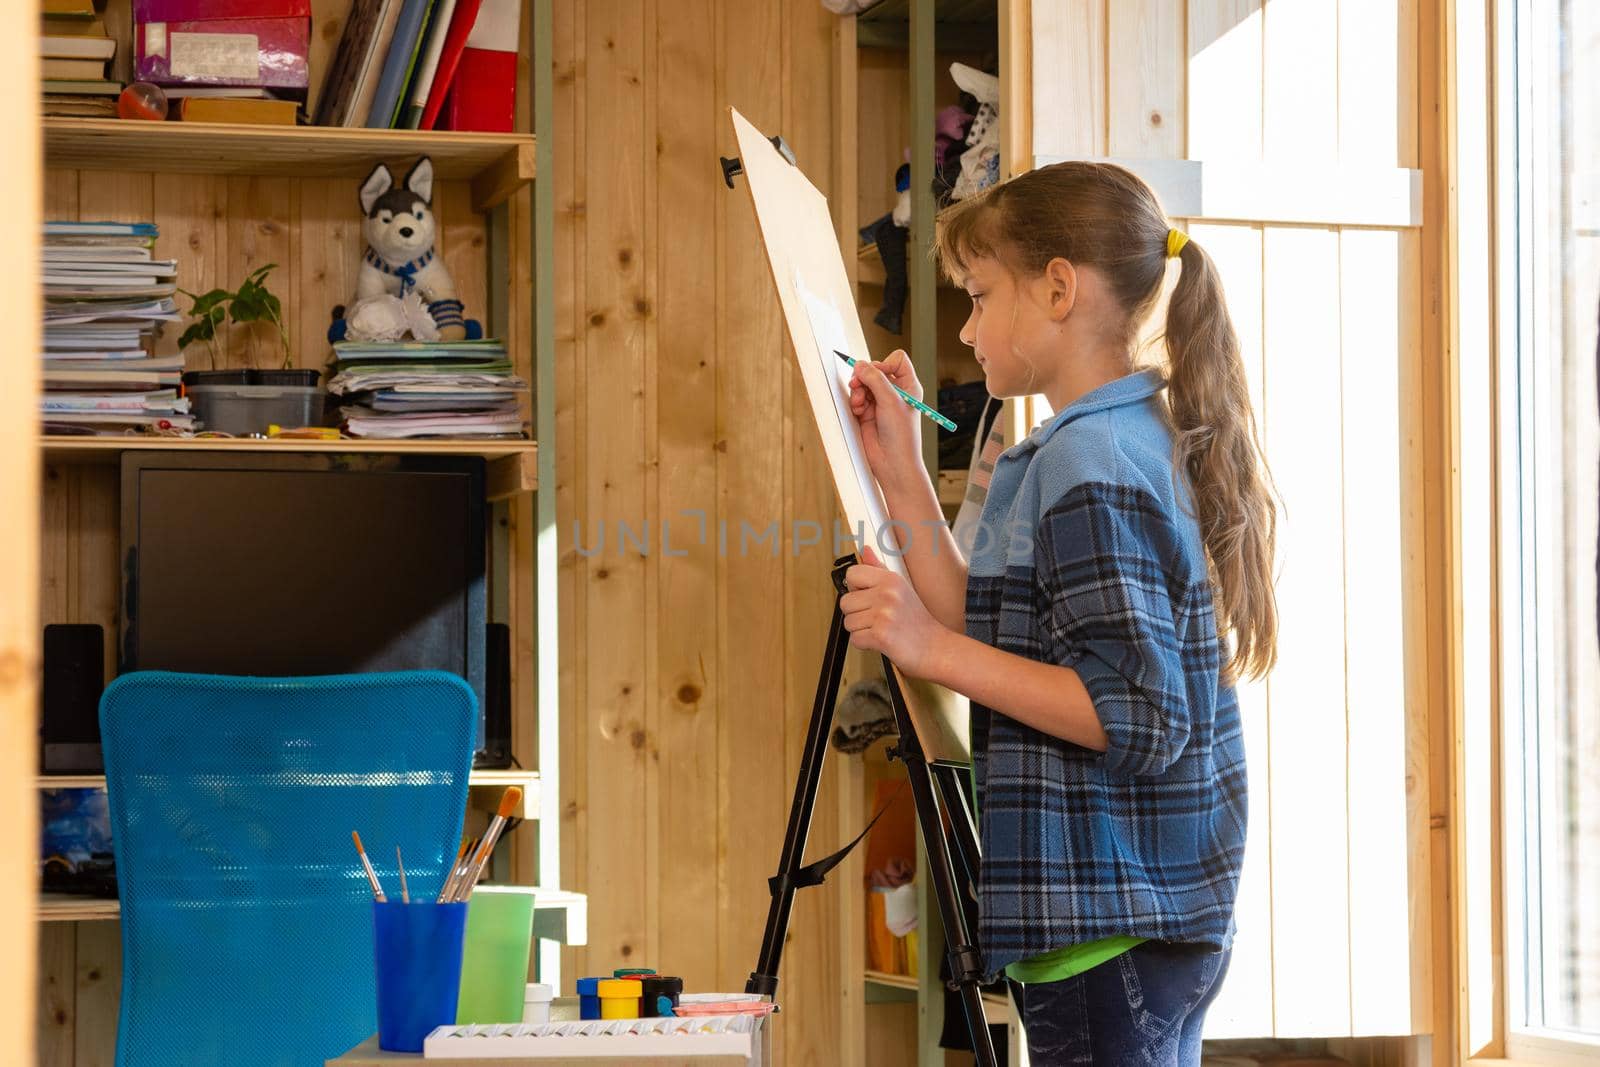 A ten-year-old girl draws on an easel at home